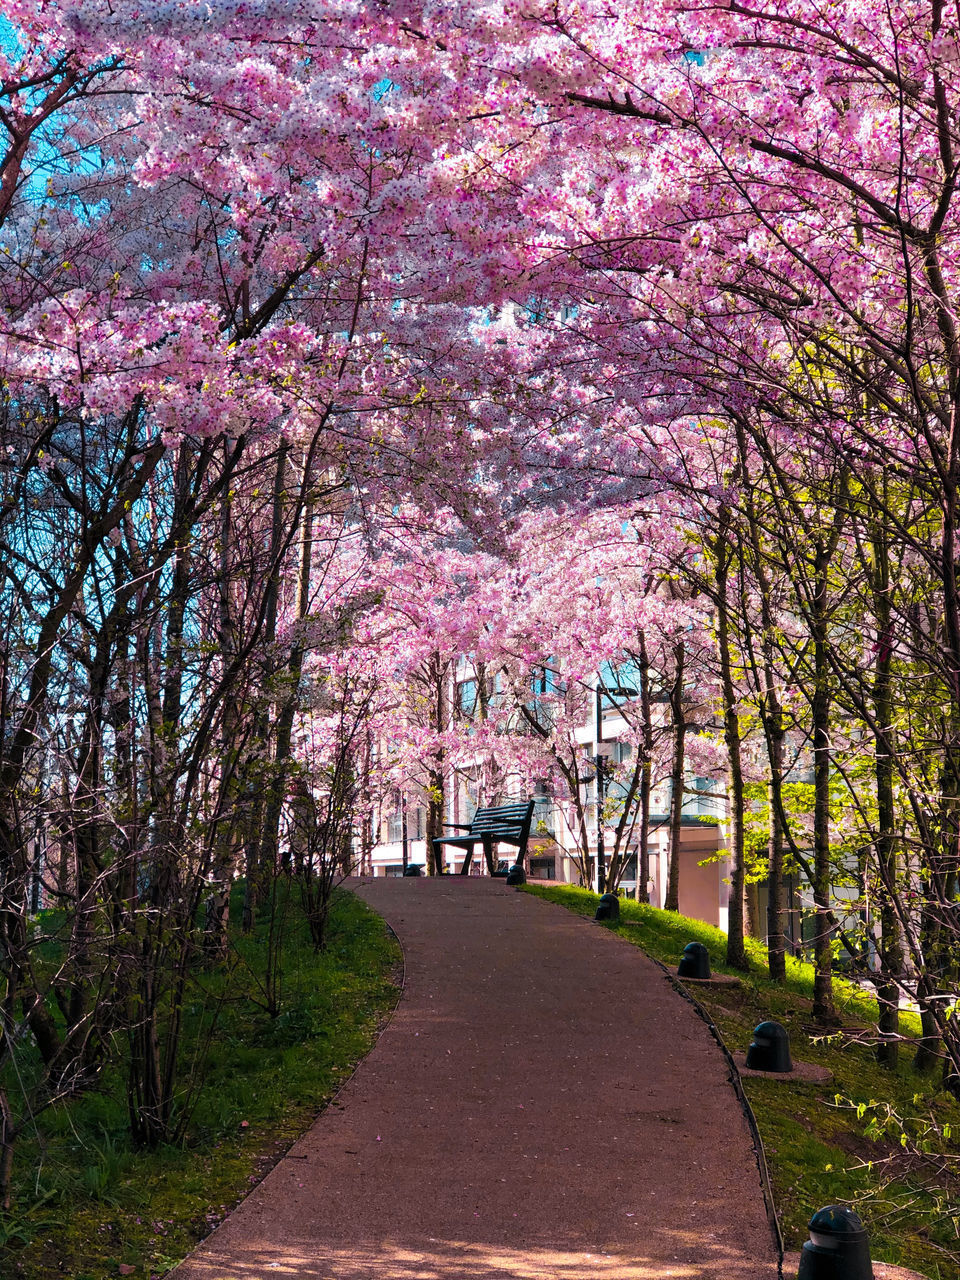 VIEW OF CHERRY BLOSSOM FROM PARK